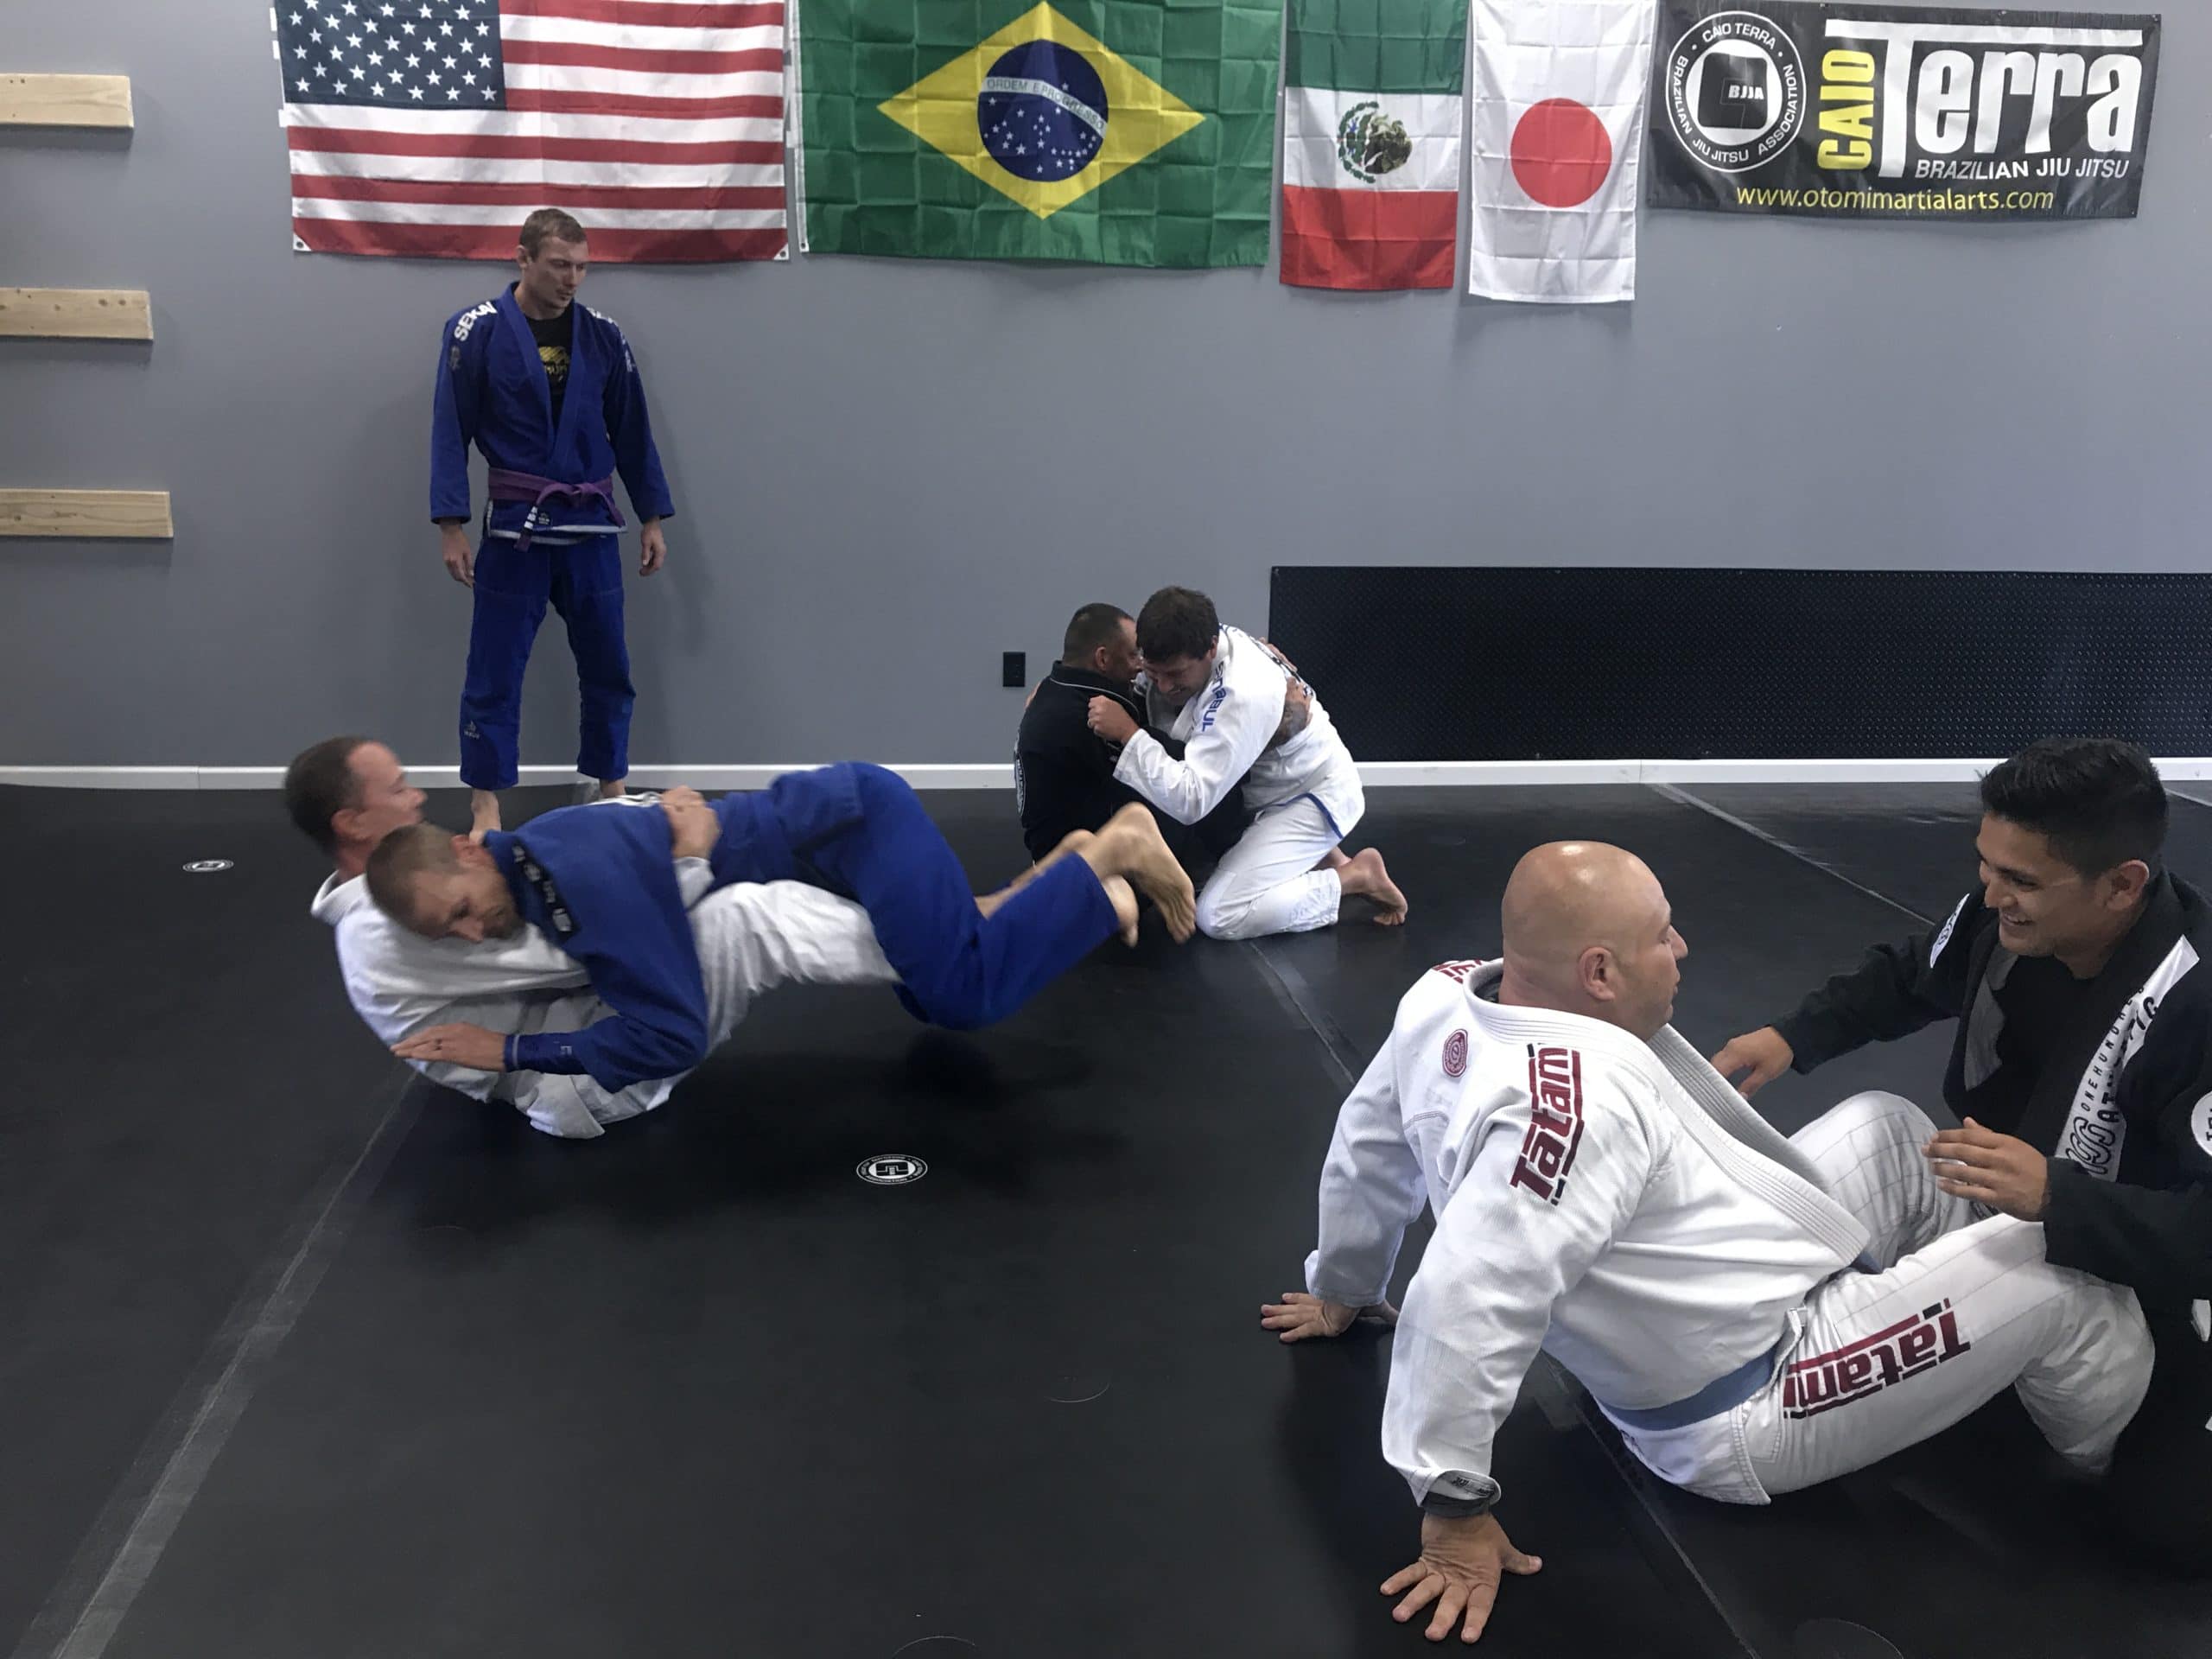 bjj adult testing at the Otomi academy